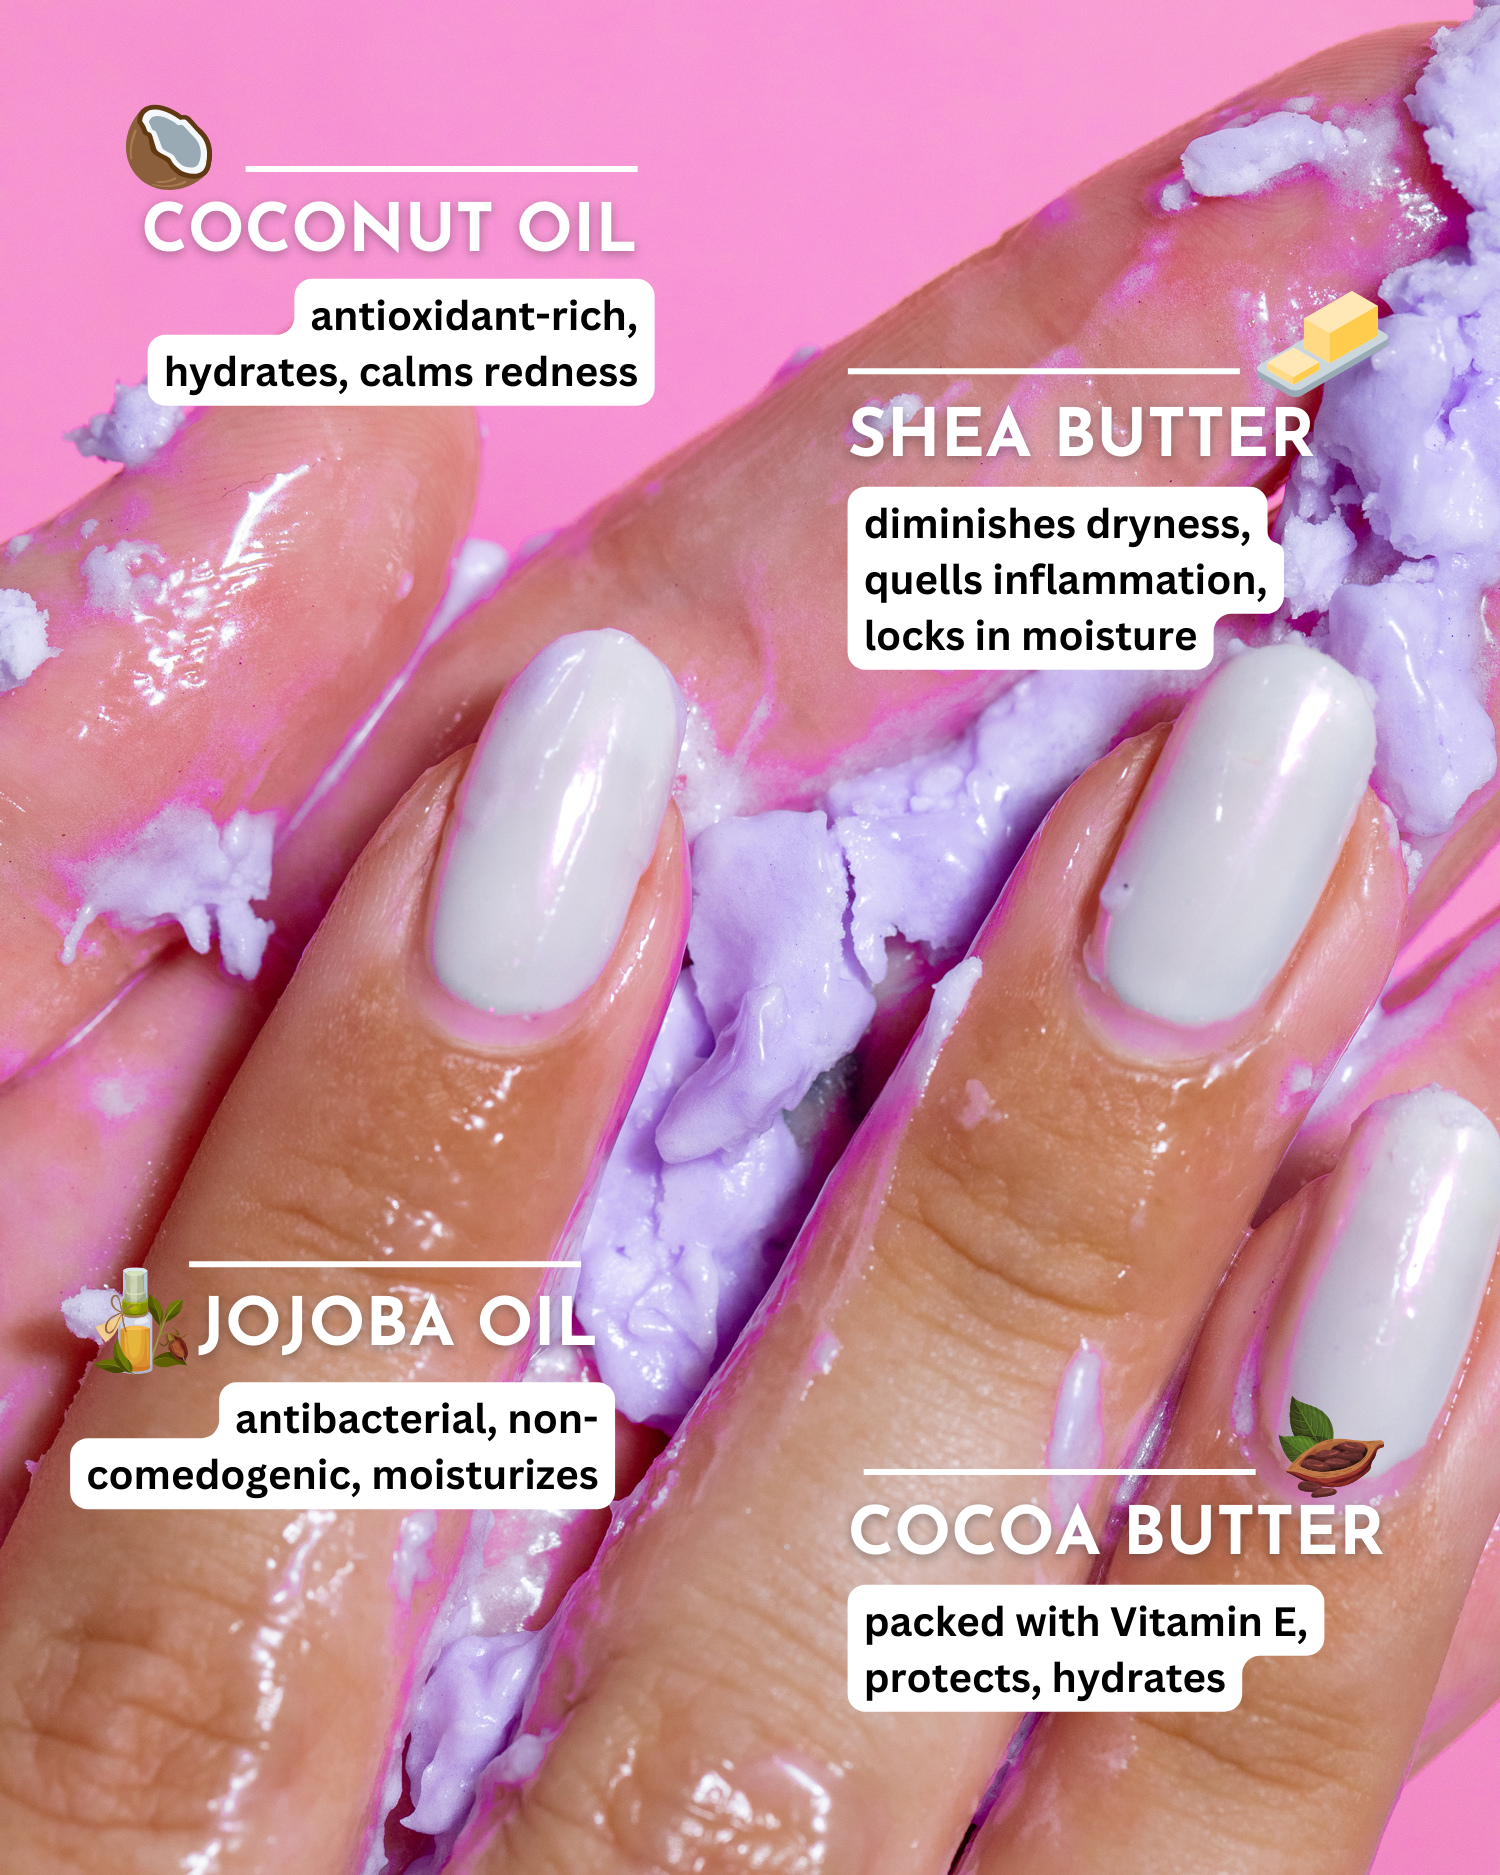 5 best oils for nails: Use these natural oils for healthy nail growth |  HealthShots